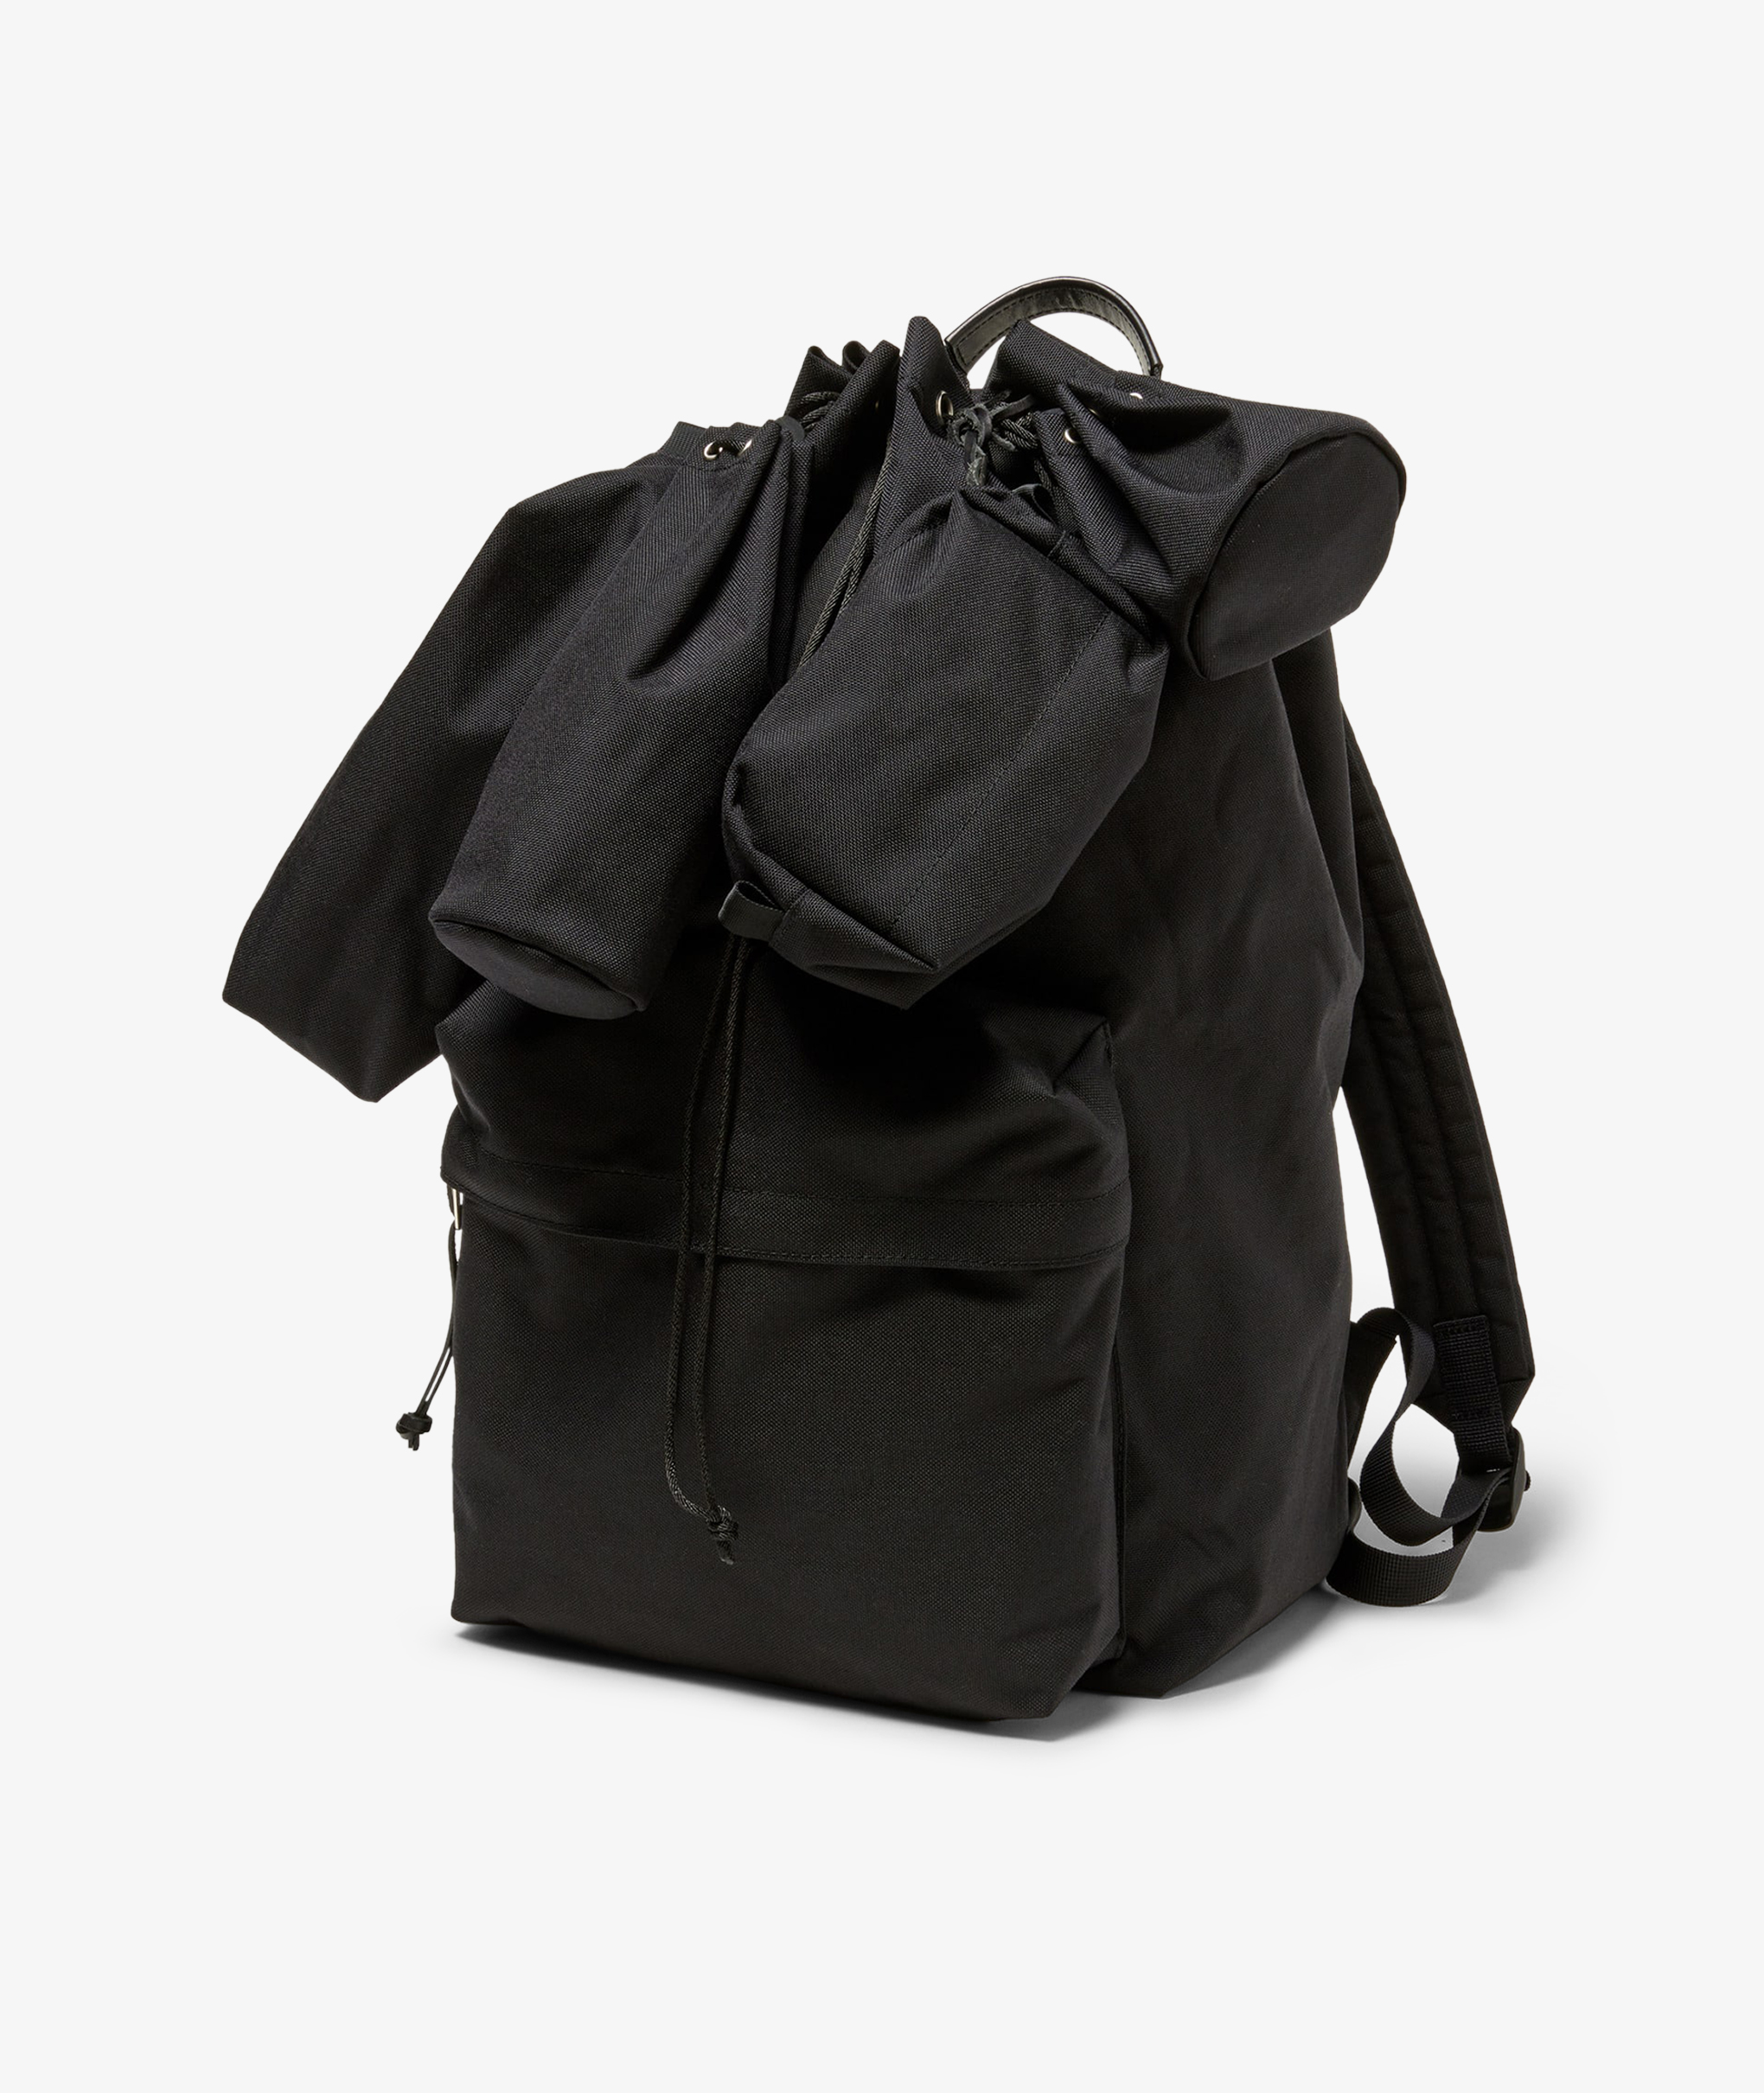 Norse Store | Shipping Worldwide - Auralee Large Backpack Set By